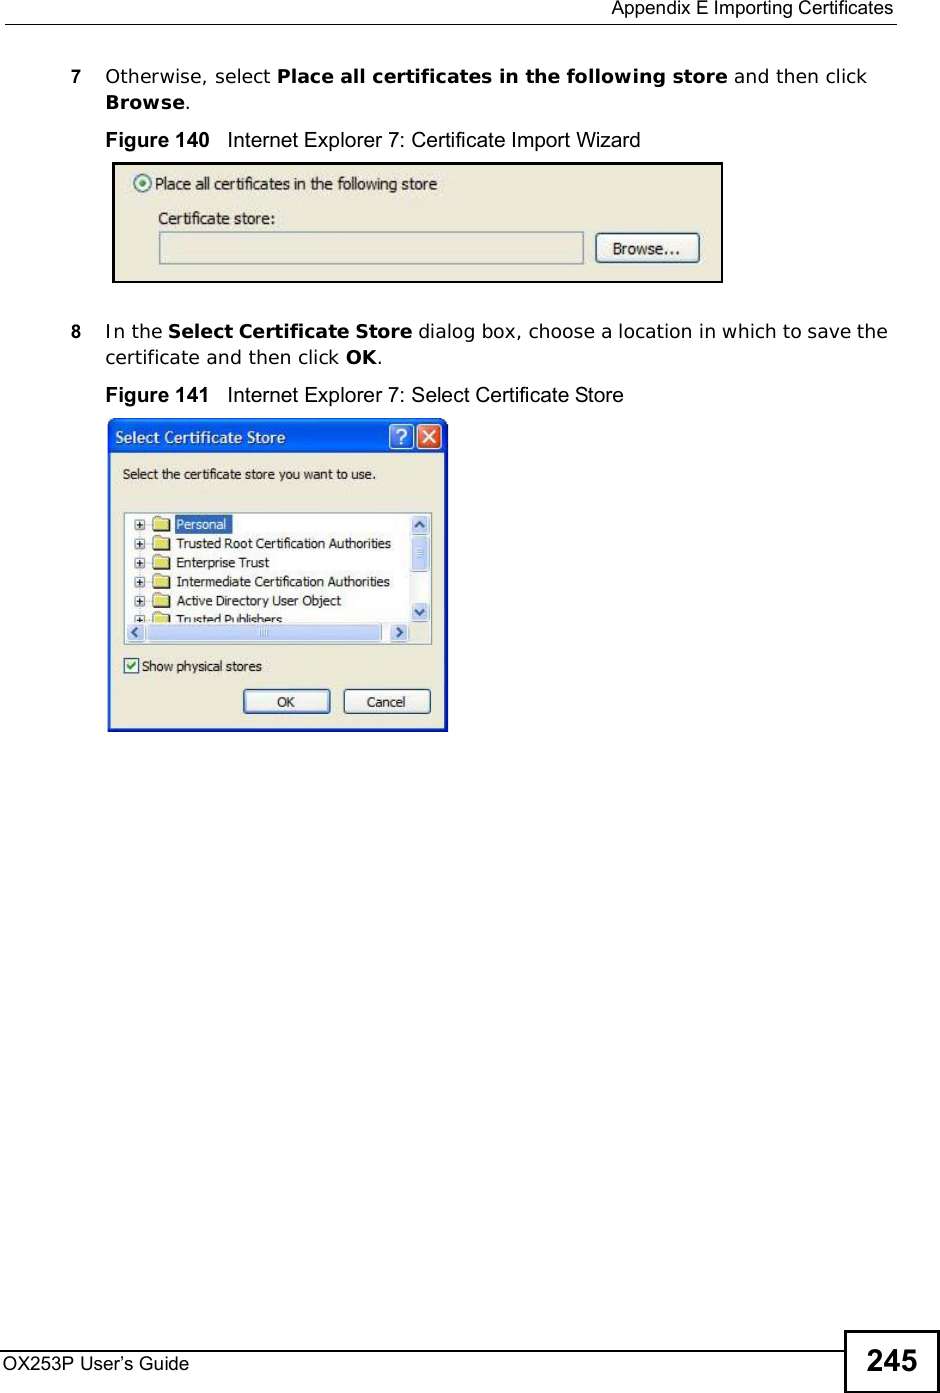  Appendix EImporting CertificatesOX253P User’s Guide 2457Otherwise, select Place all certificates in the following store and then click Browse.Figure 140   Internet Explorer 7: Certificate Import Wizard8In the Select Certificate Store dialog box, choose a location in which to save the certificate and then click OK.Figure 141   Internet Explorer 7: Select Certificate Store